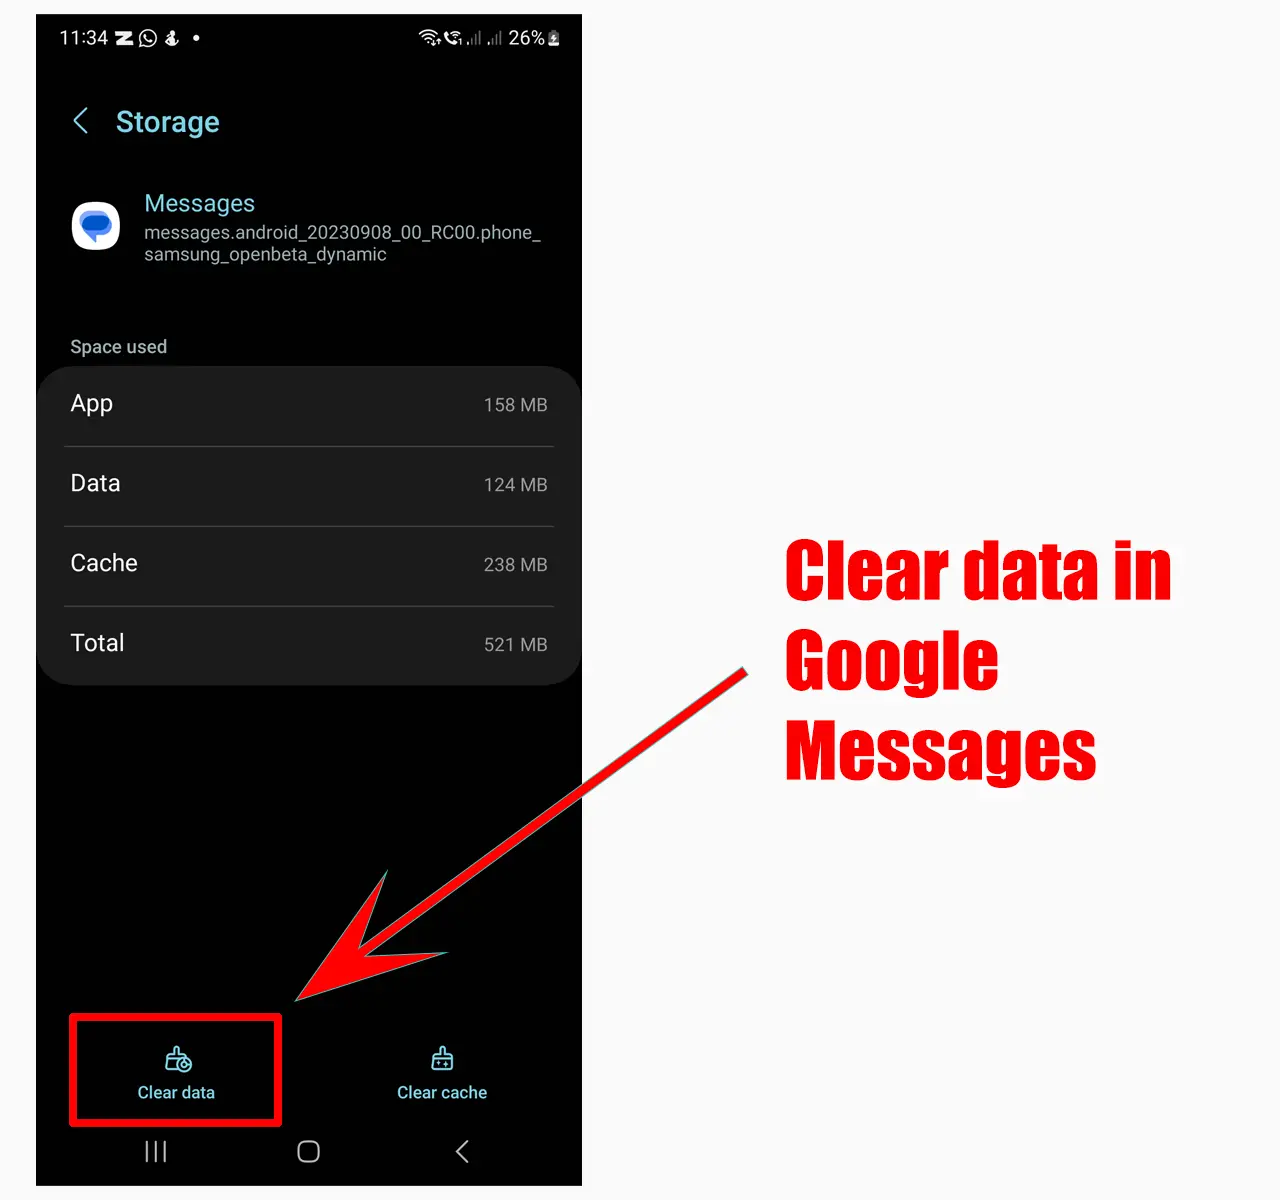 Clear data in Google Messages